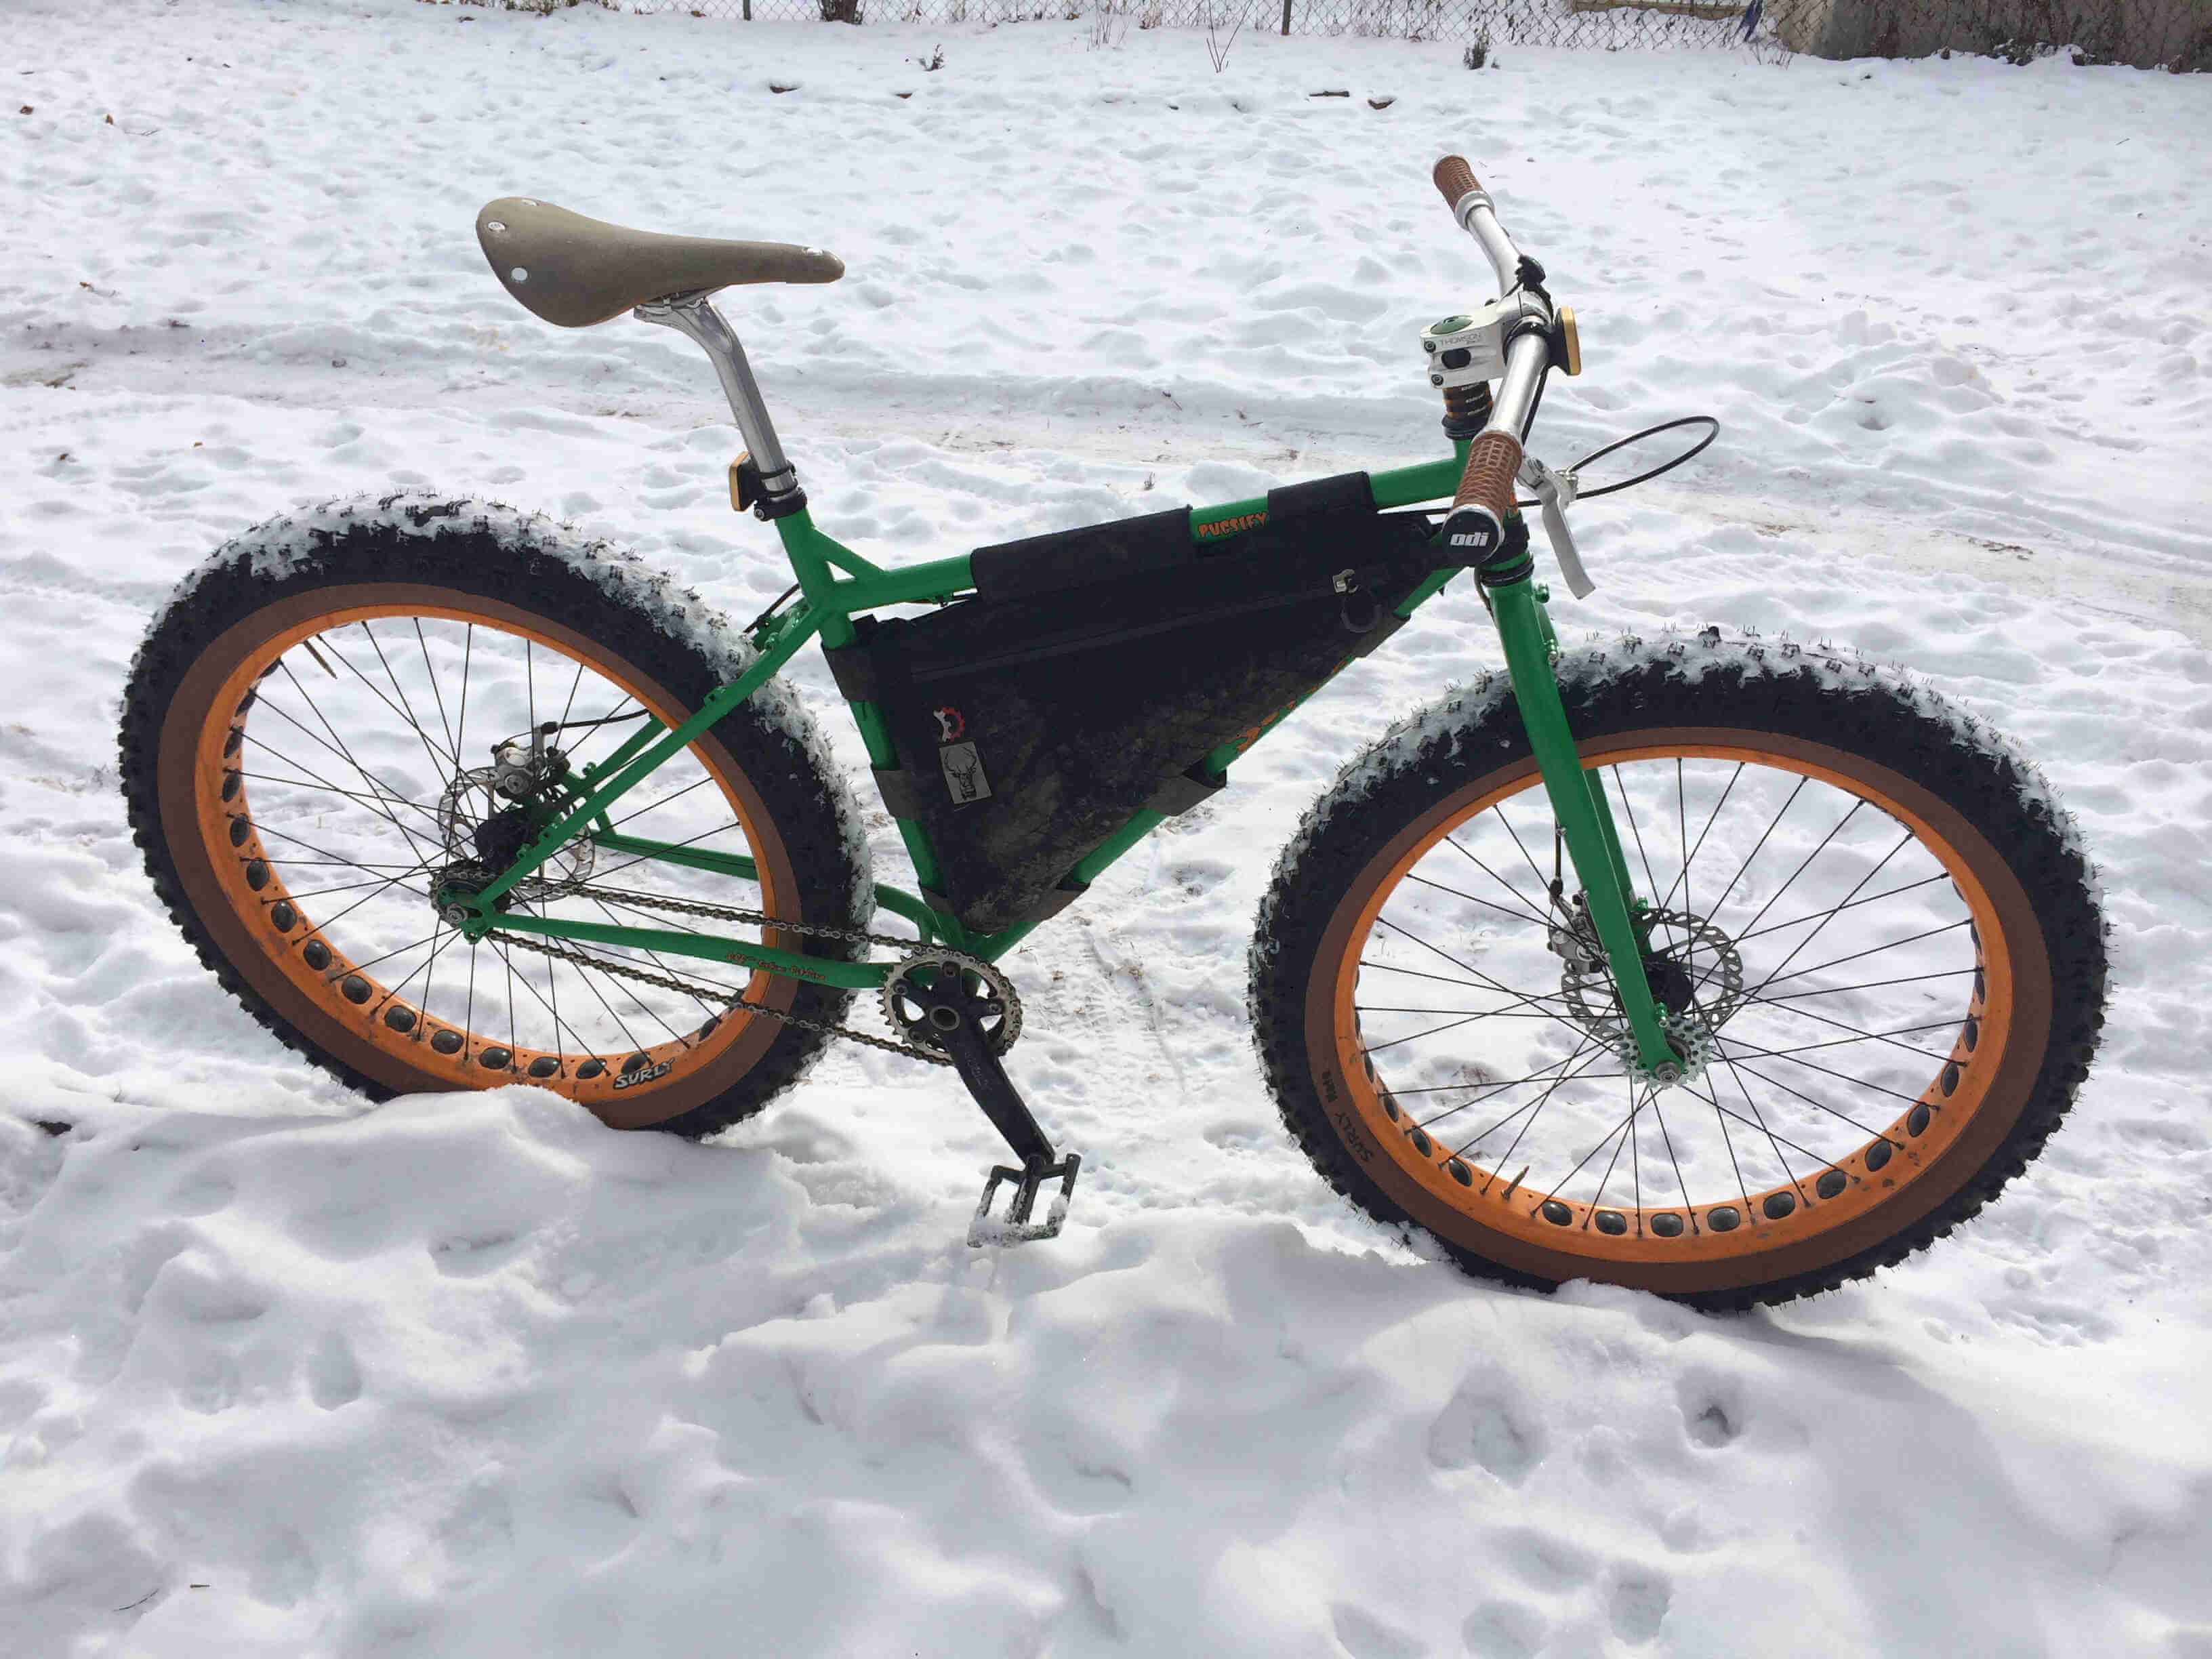 Right side view of a green Surly Pugsley fat bike with frame pack, parked along a snowbank on the side of a snowy trail